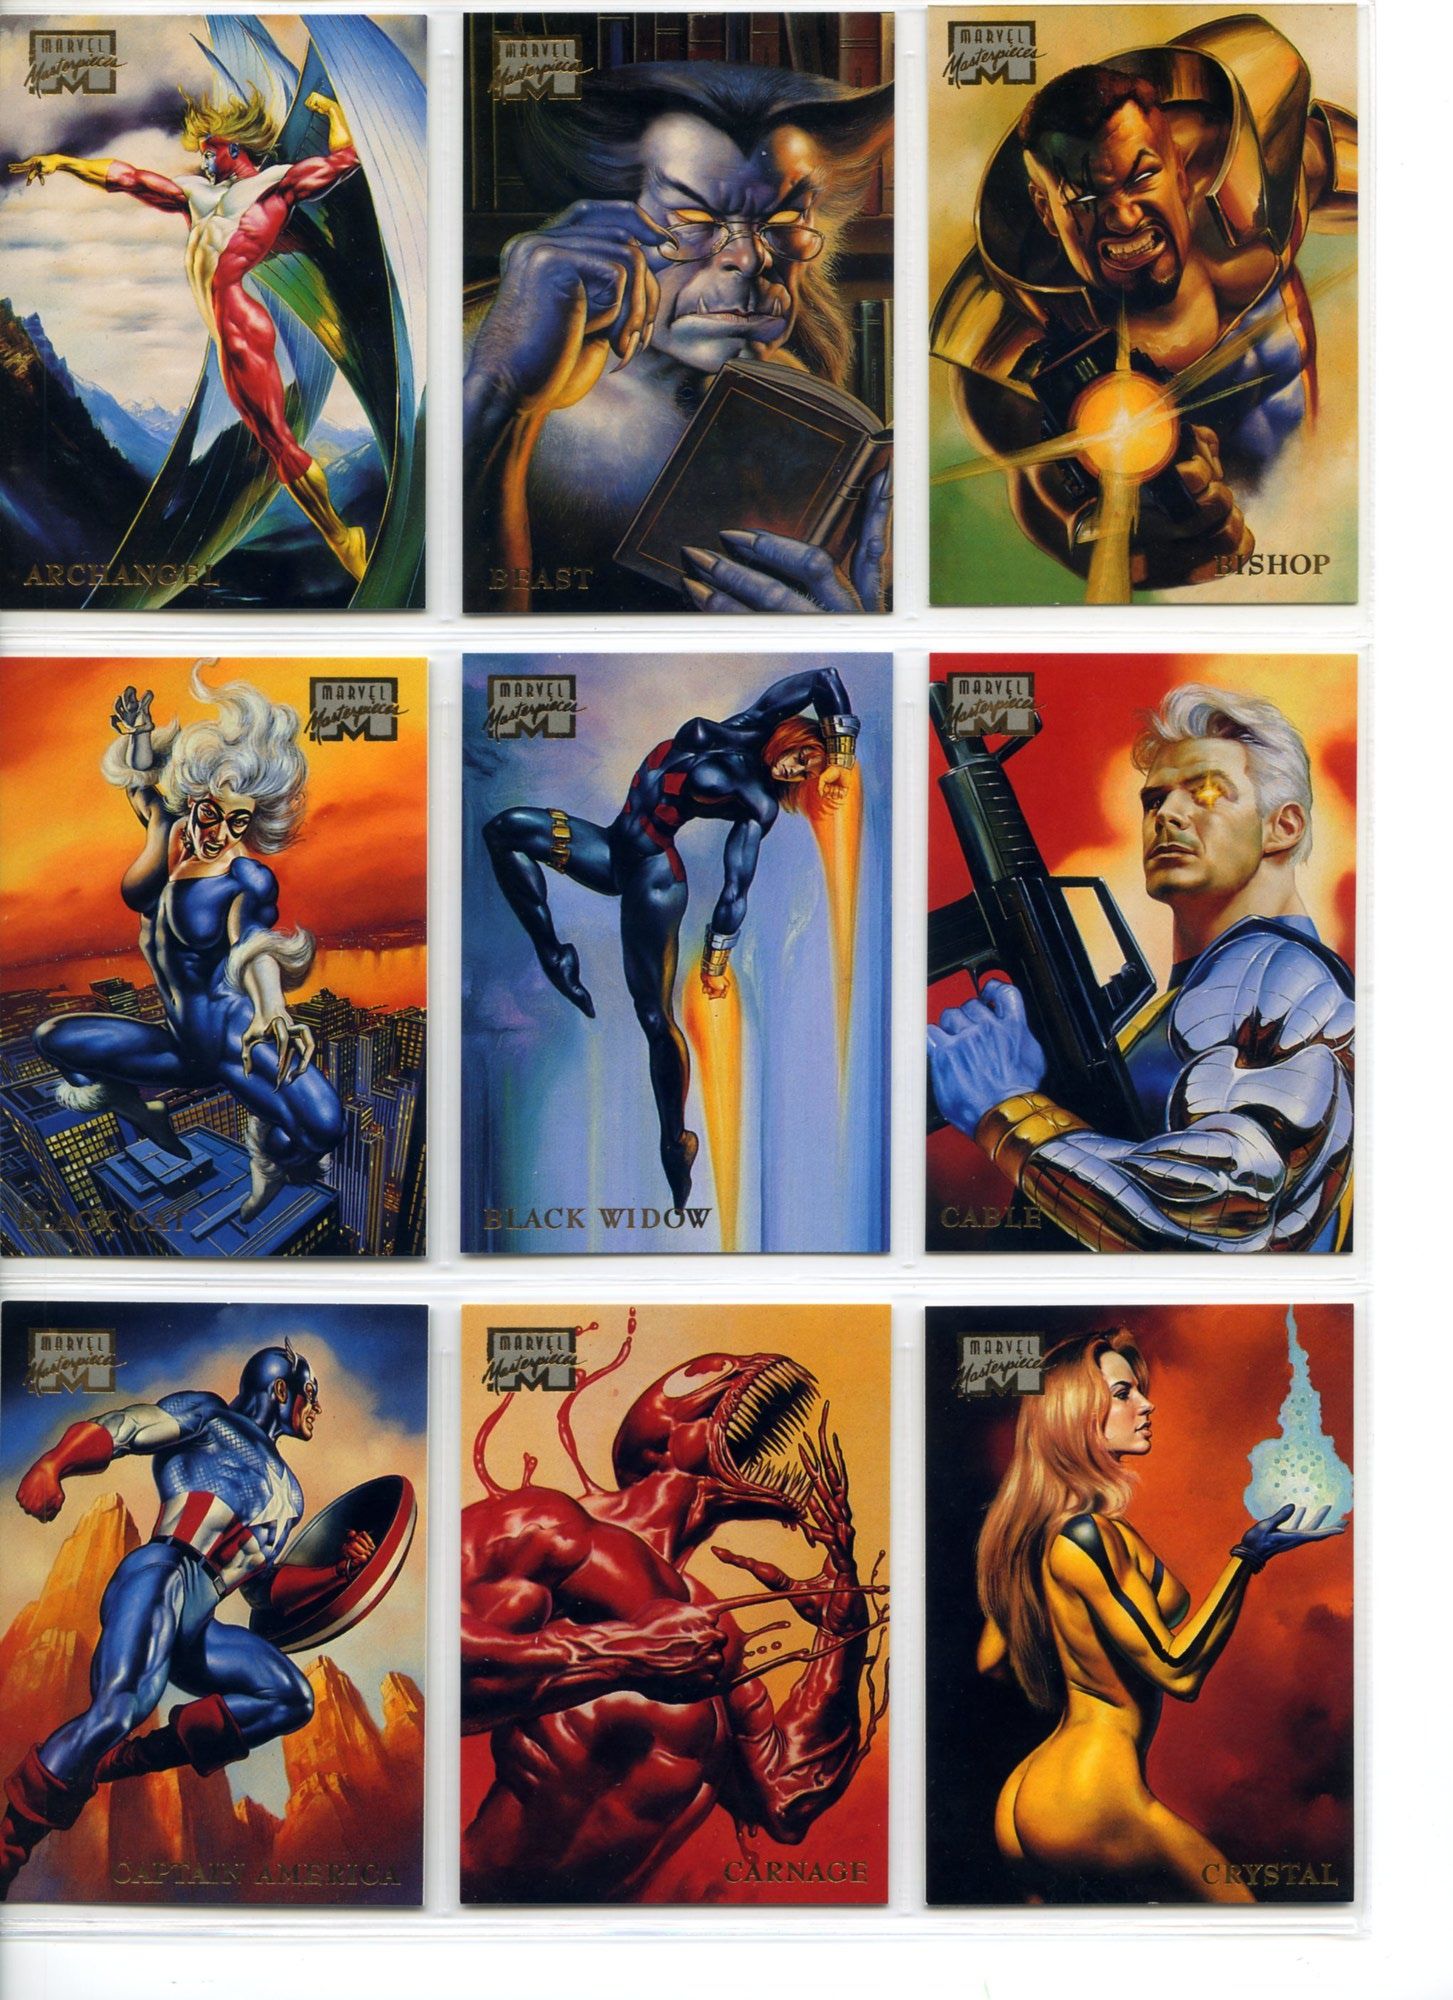 1996 Marvel Masterpieces Trading Cards Many to choose from!! 